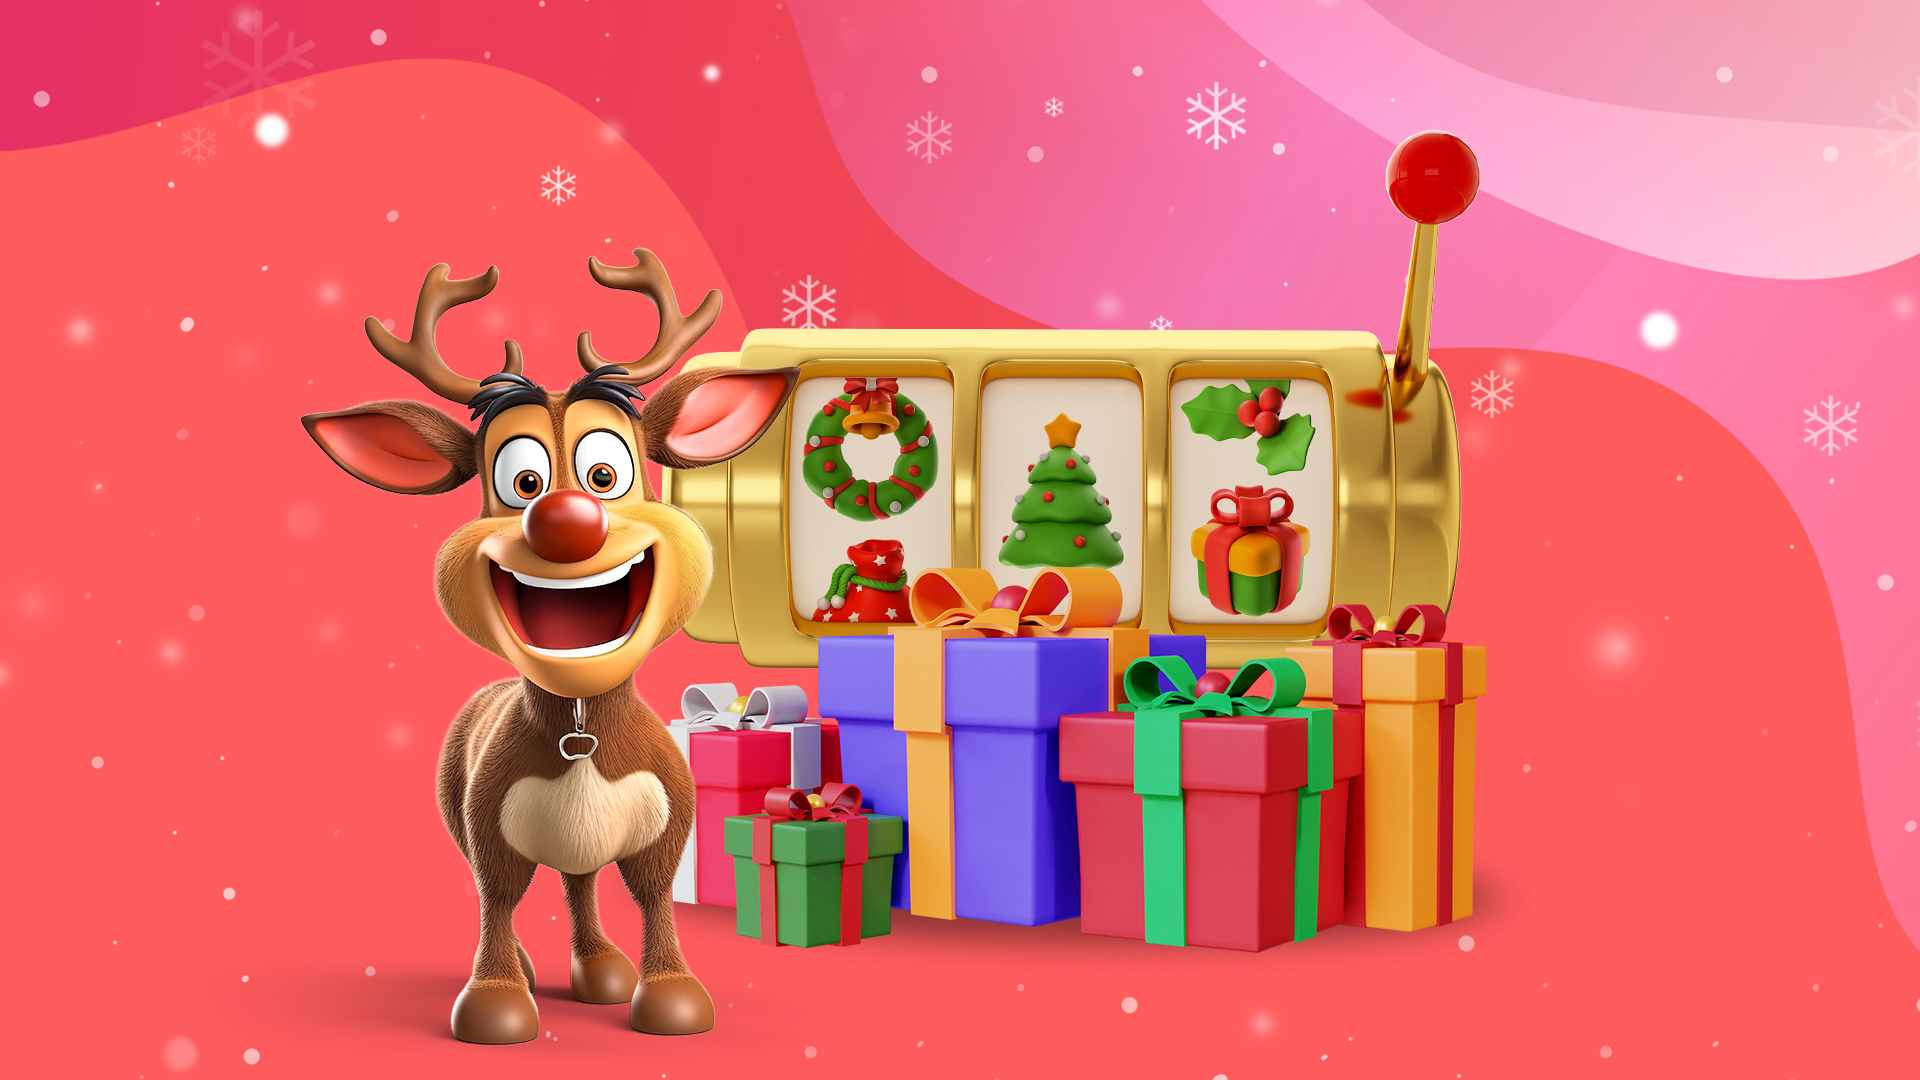 A cartoon reindeer stands beside a slot machine and gifts against a pink background.